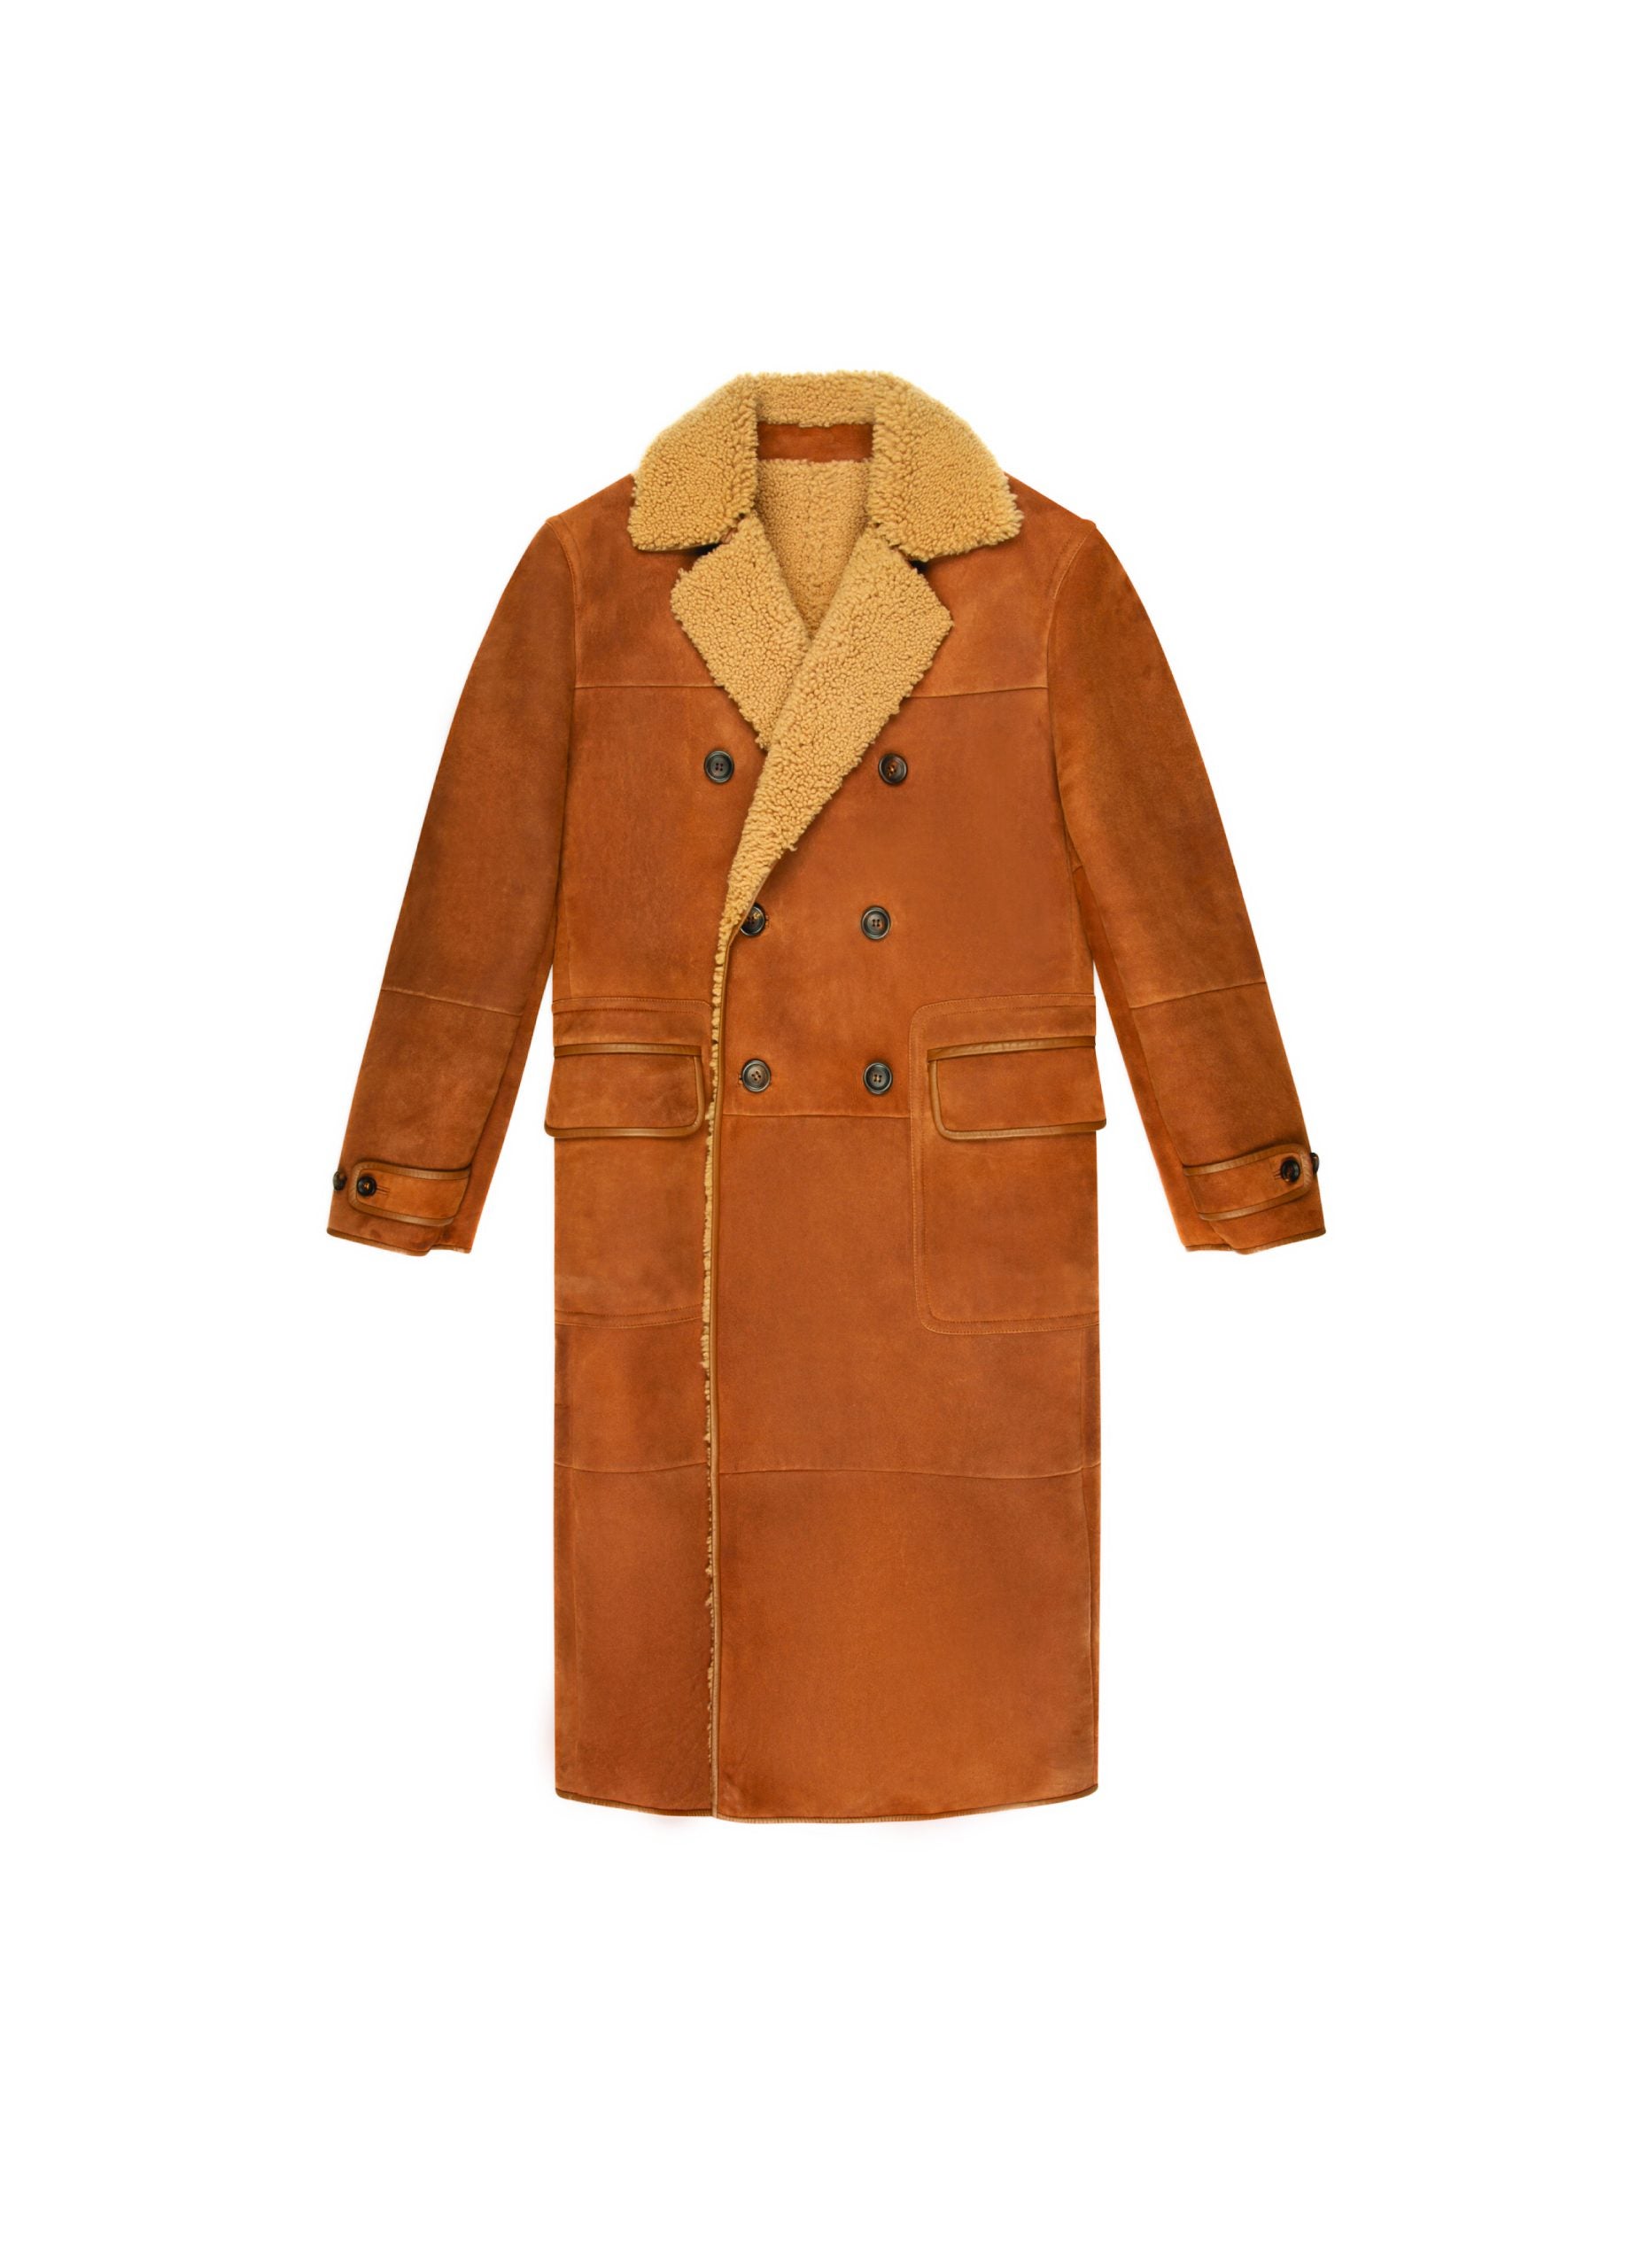 The Best Winter Coats That Will Keep You Stylish & Warm